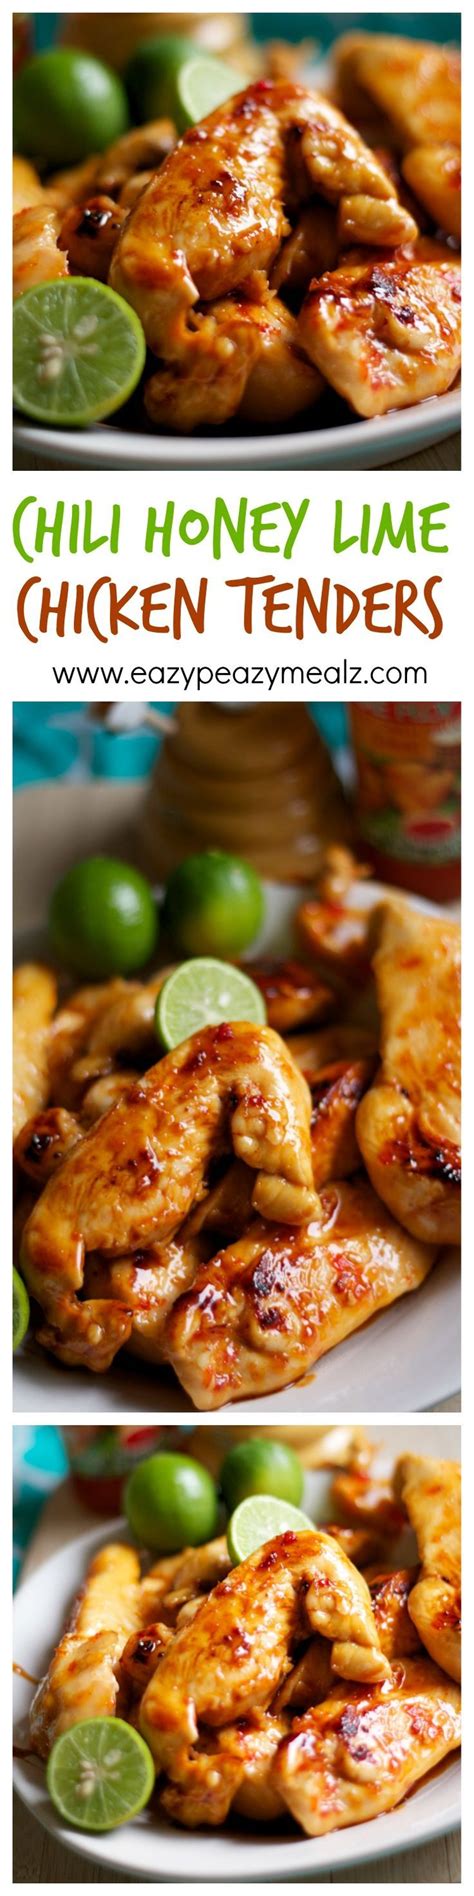 Chili Honey Lime Chicken Tenders Easy Peasy Meals Recipe Chicken